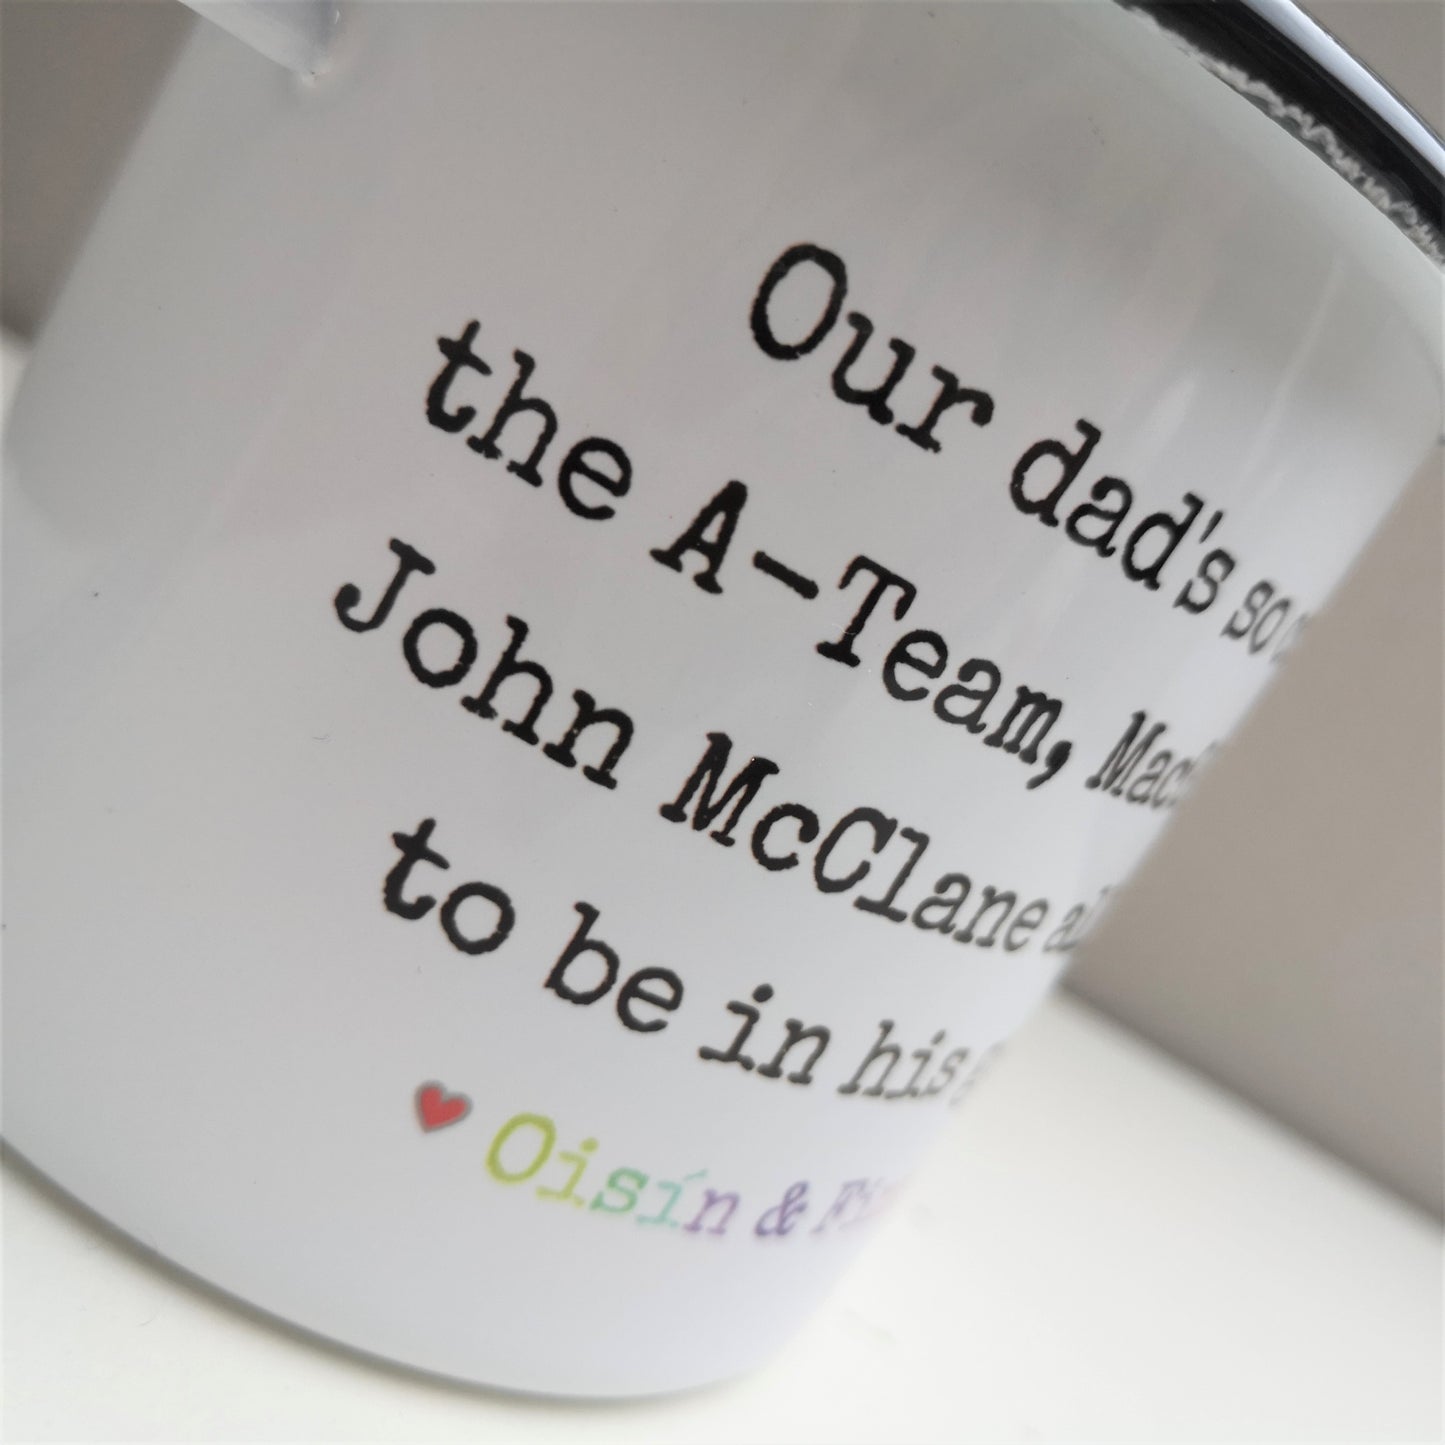 A close up of a White enamel mug with a black rim with the following on the front - Our dad's so cool the A-Team, MacGyver and John McClane all want to be in his gang. Below that text is a space for personalised names to go.